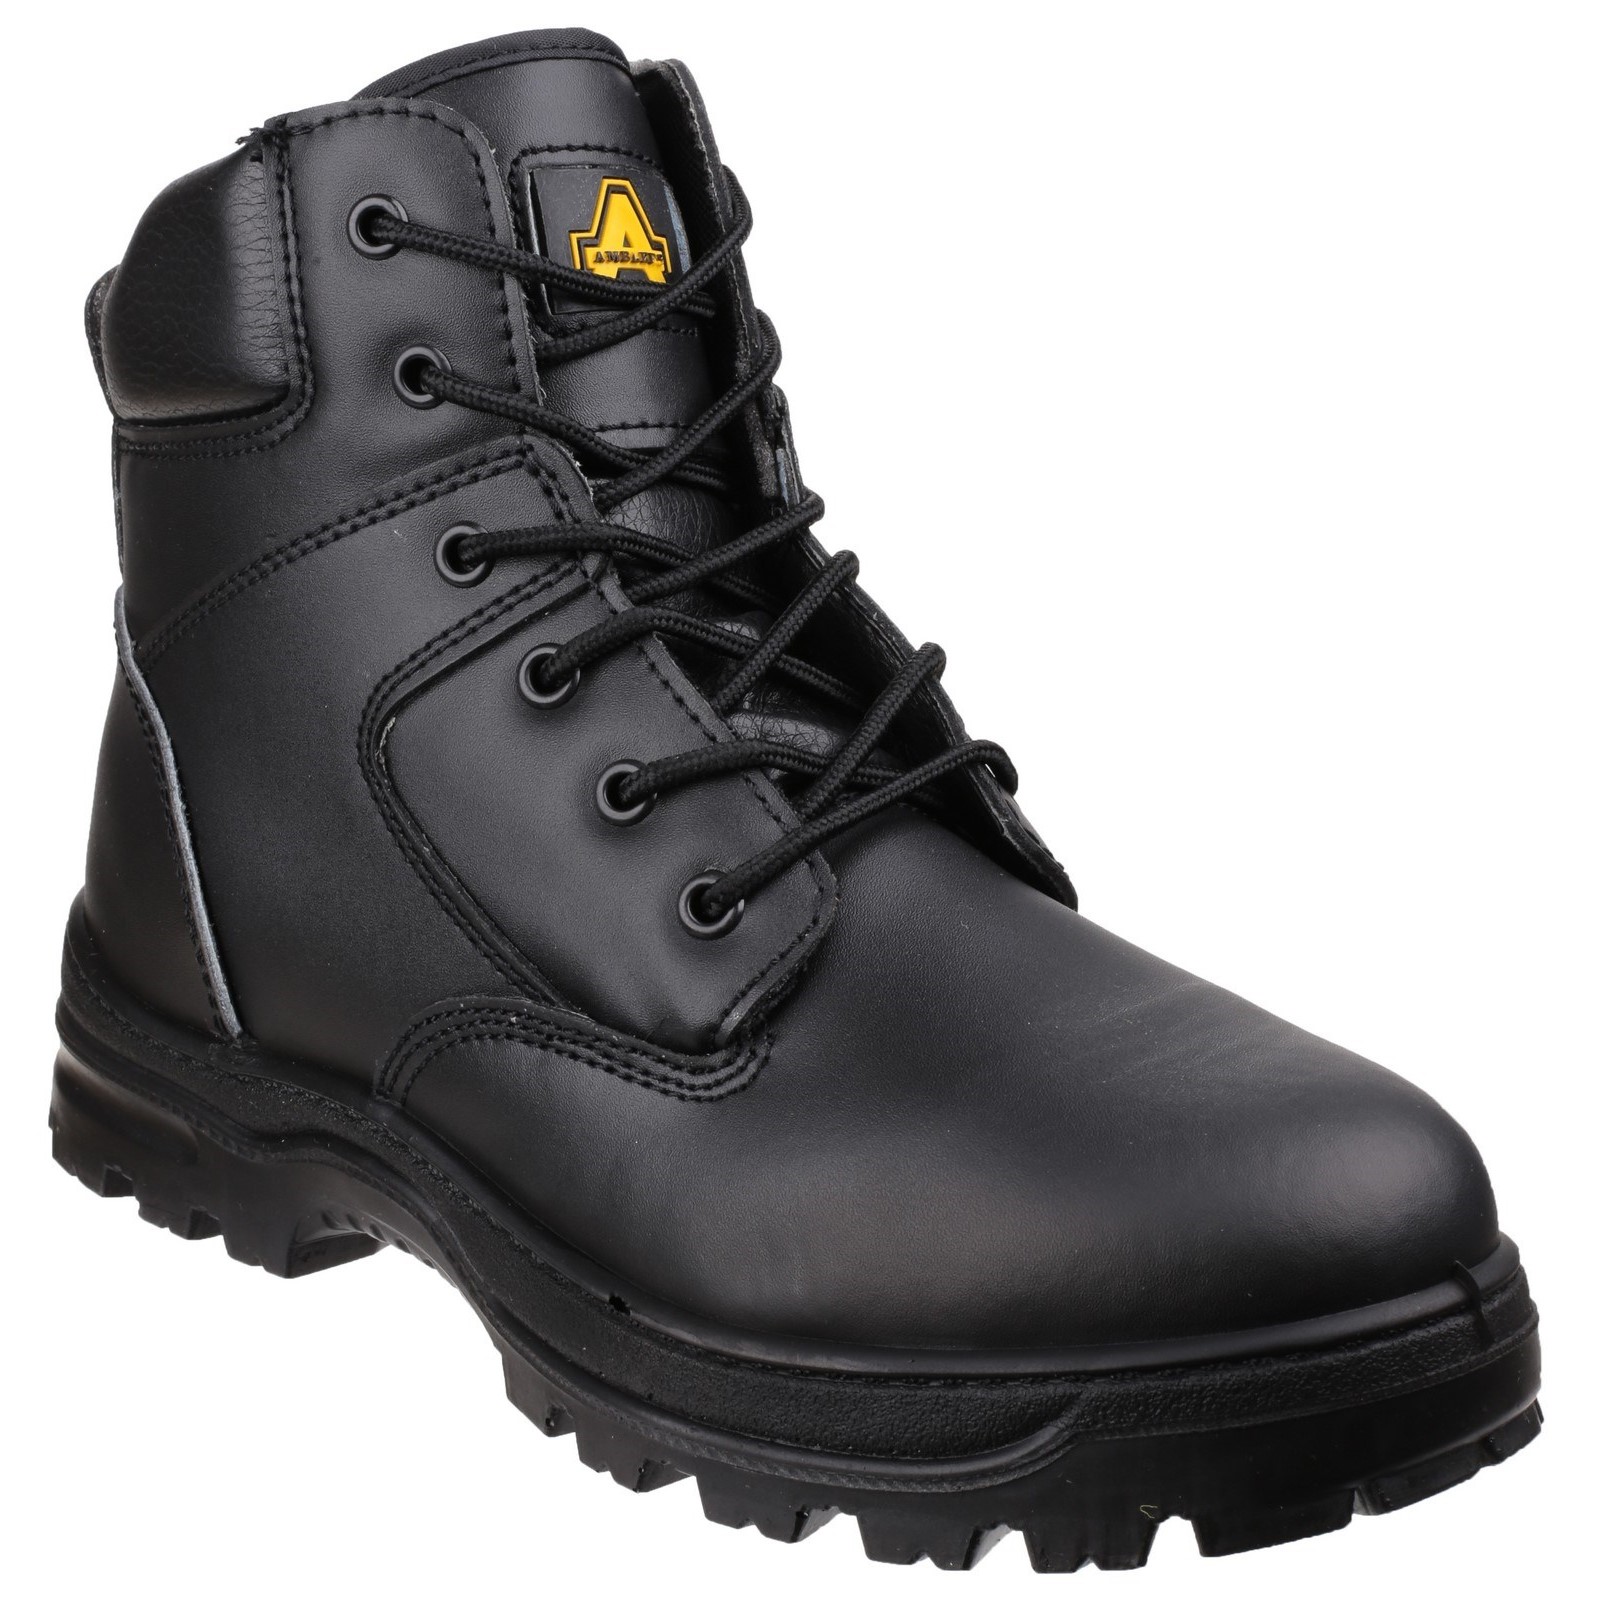 FS84 Antistatic Lace up Safety Boot